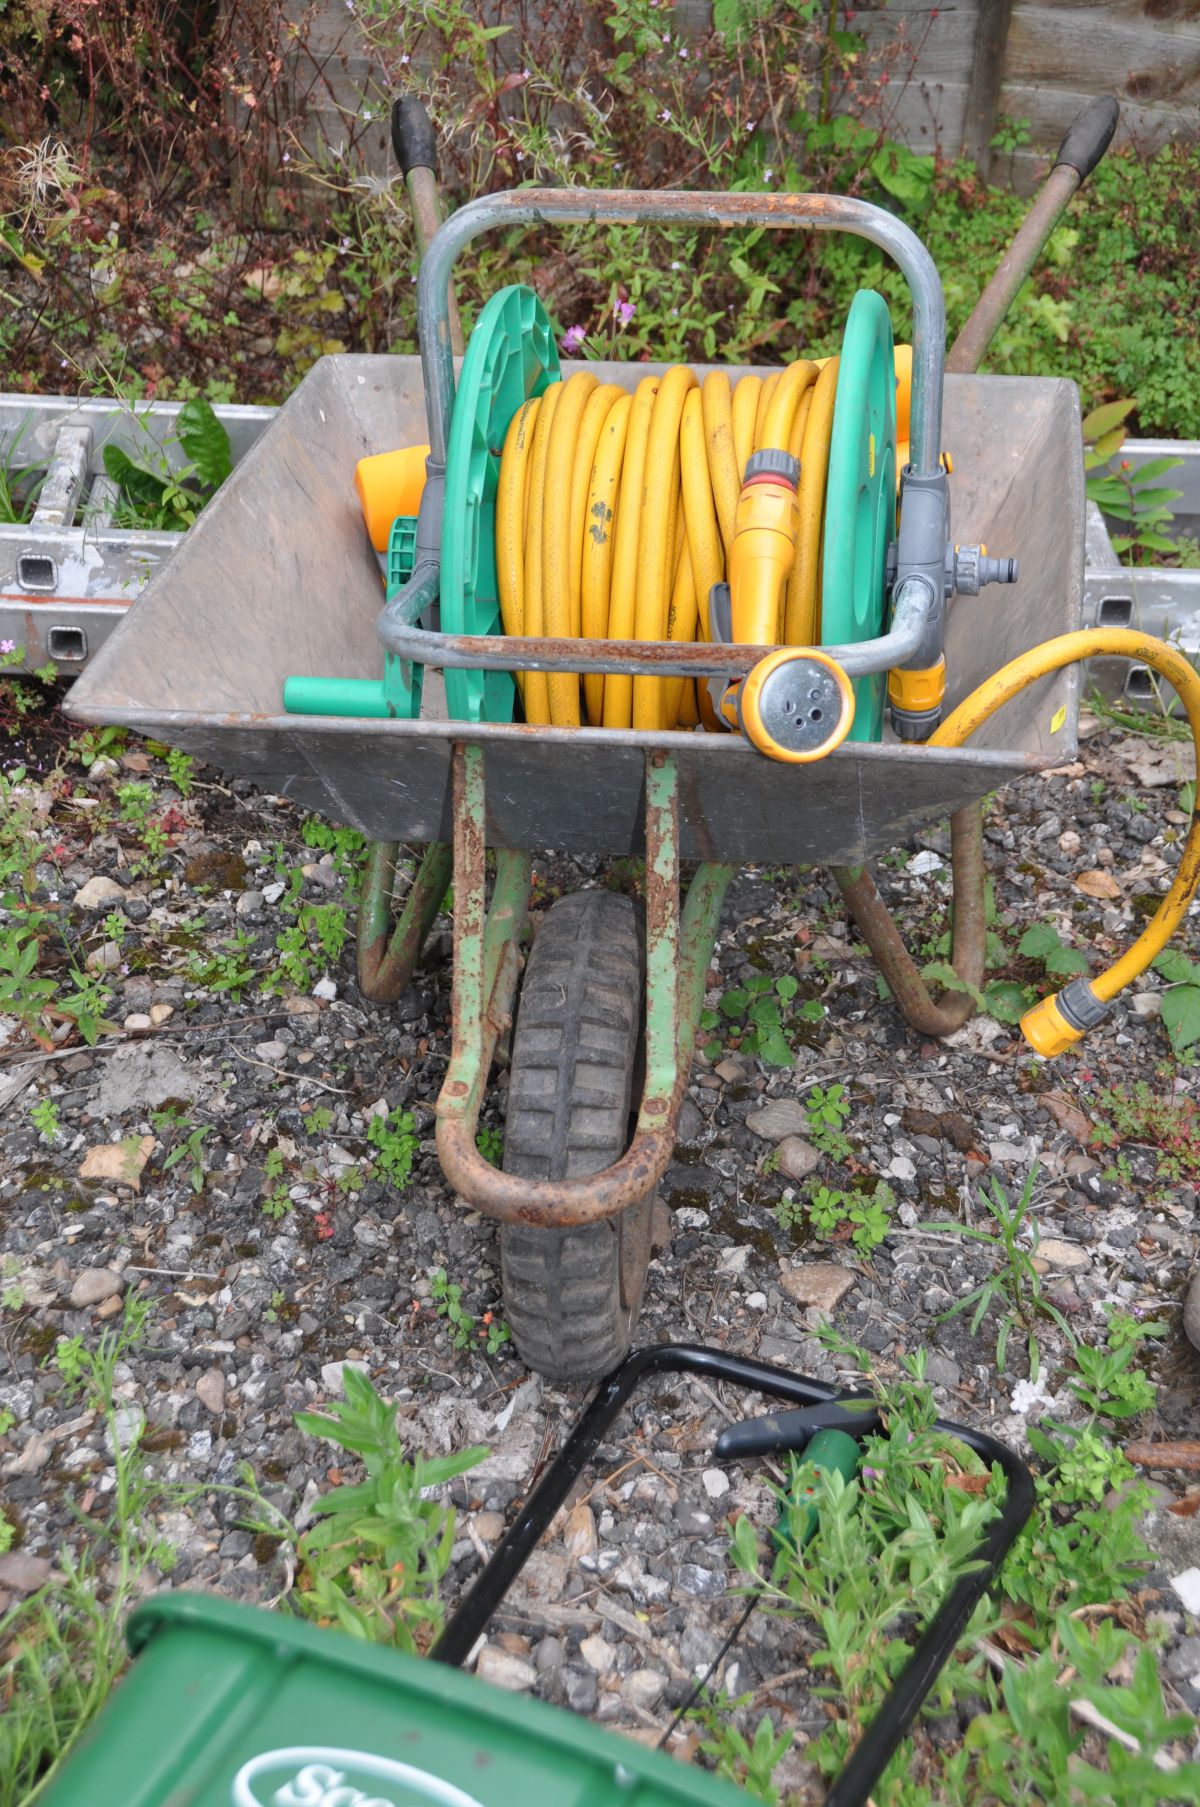 A QUANTITY OF GARDEN TOOLS AND A WHEELBARROW including spades, rakes, seed spreaders, hosepipe on - Image 3 of 3